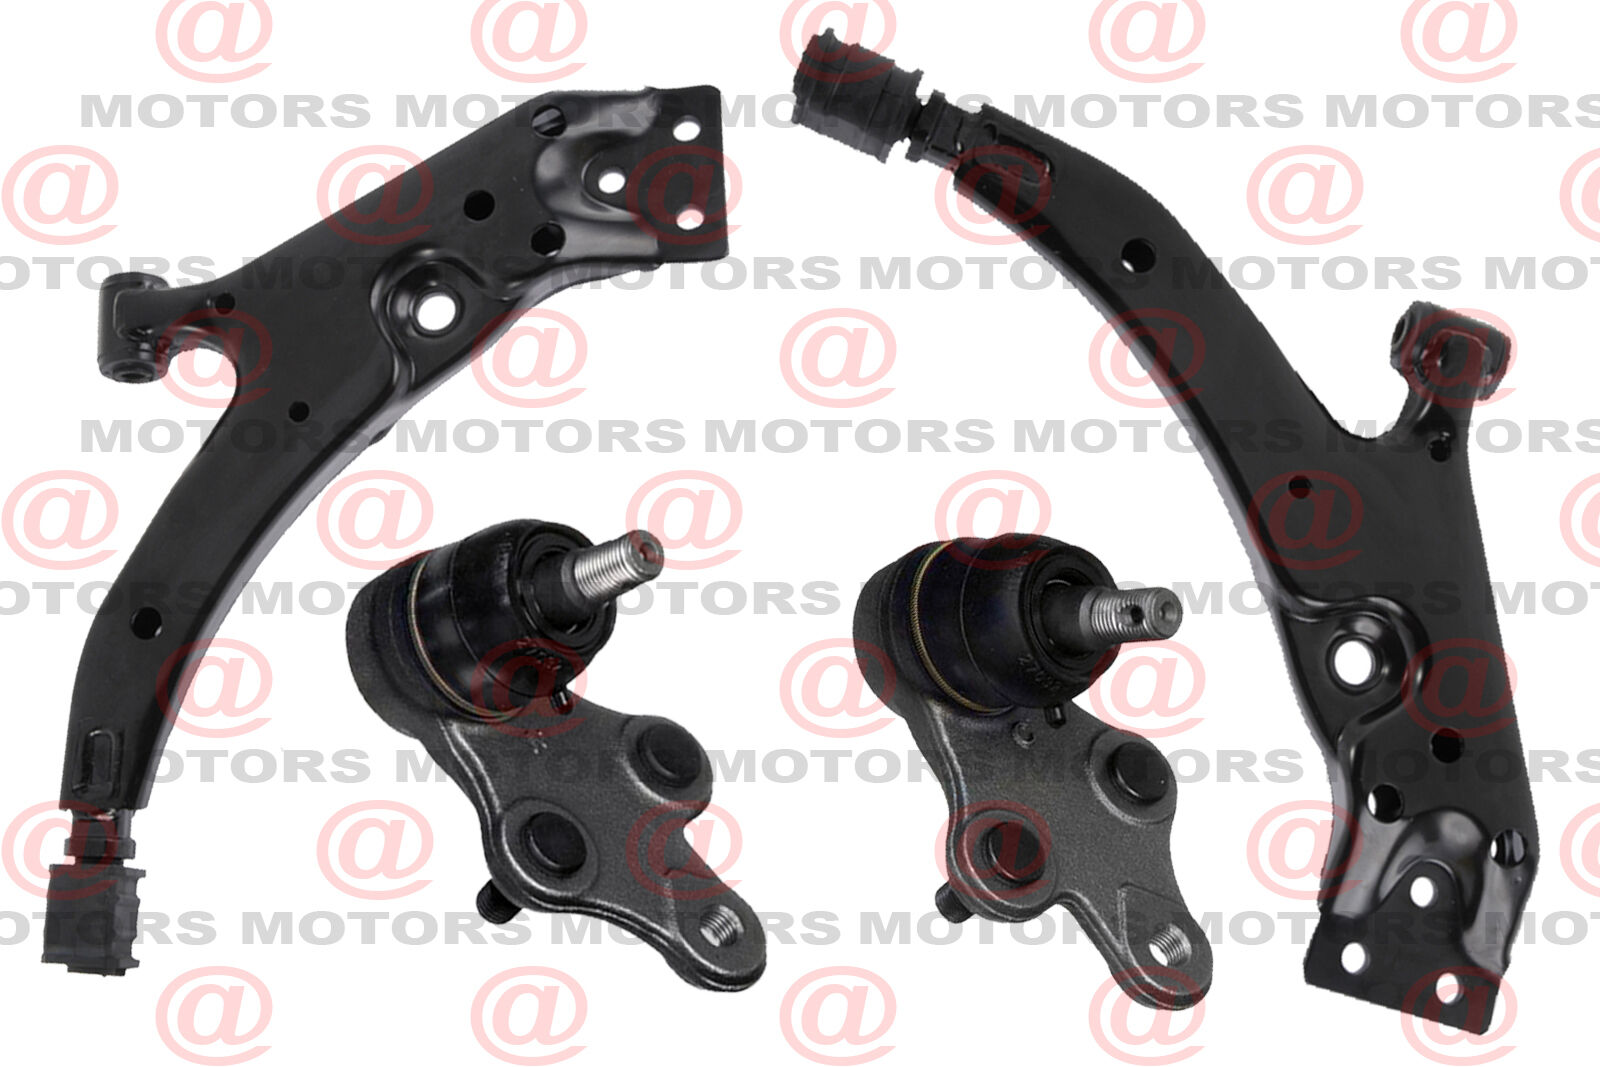 2 Lower Control Arms Suspension 2 Lower Ball Joints Toyota Tercel Paseo 1.5L 